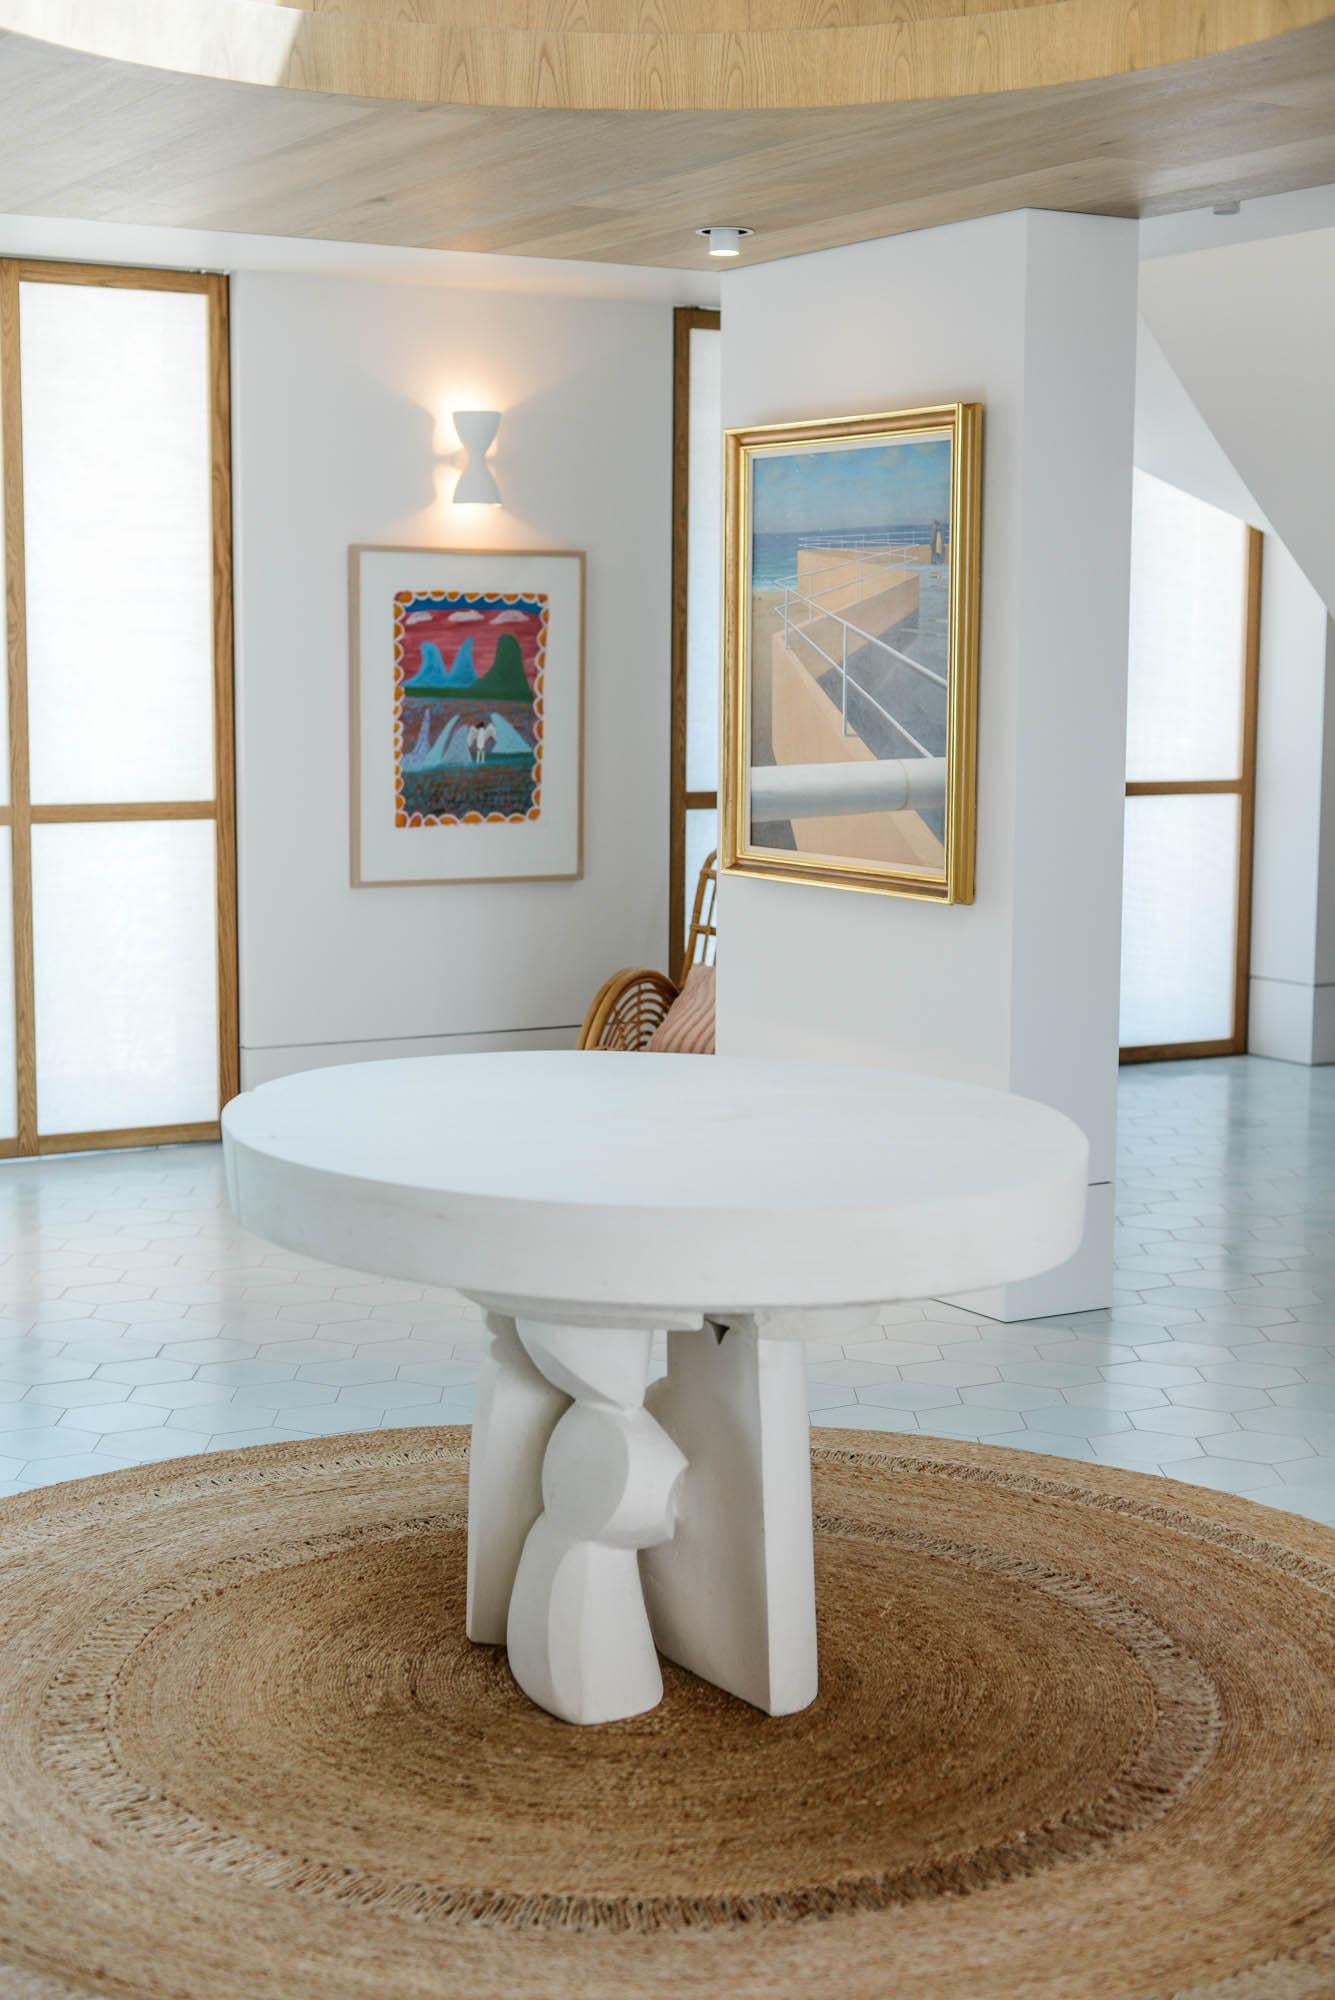 Contemporary table in limestone 'Sydney' by denHolm.

Each creation is unique and signed by the artist.

Dimensions:
H. 80 cm
W. 120 cm
D. 120 cm

Material:
South Australian Limestone, sculpted entirely by hand.
---
Artist and stonemason Steve Clark